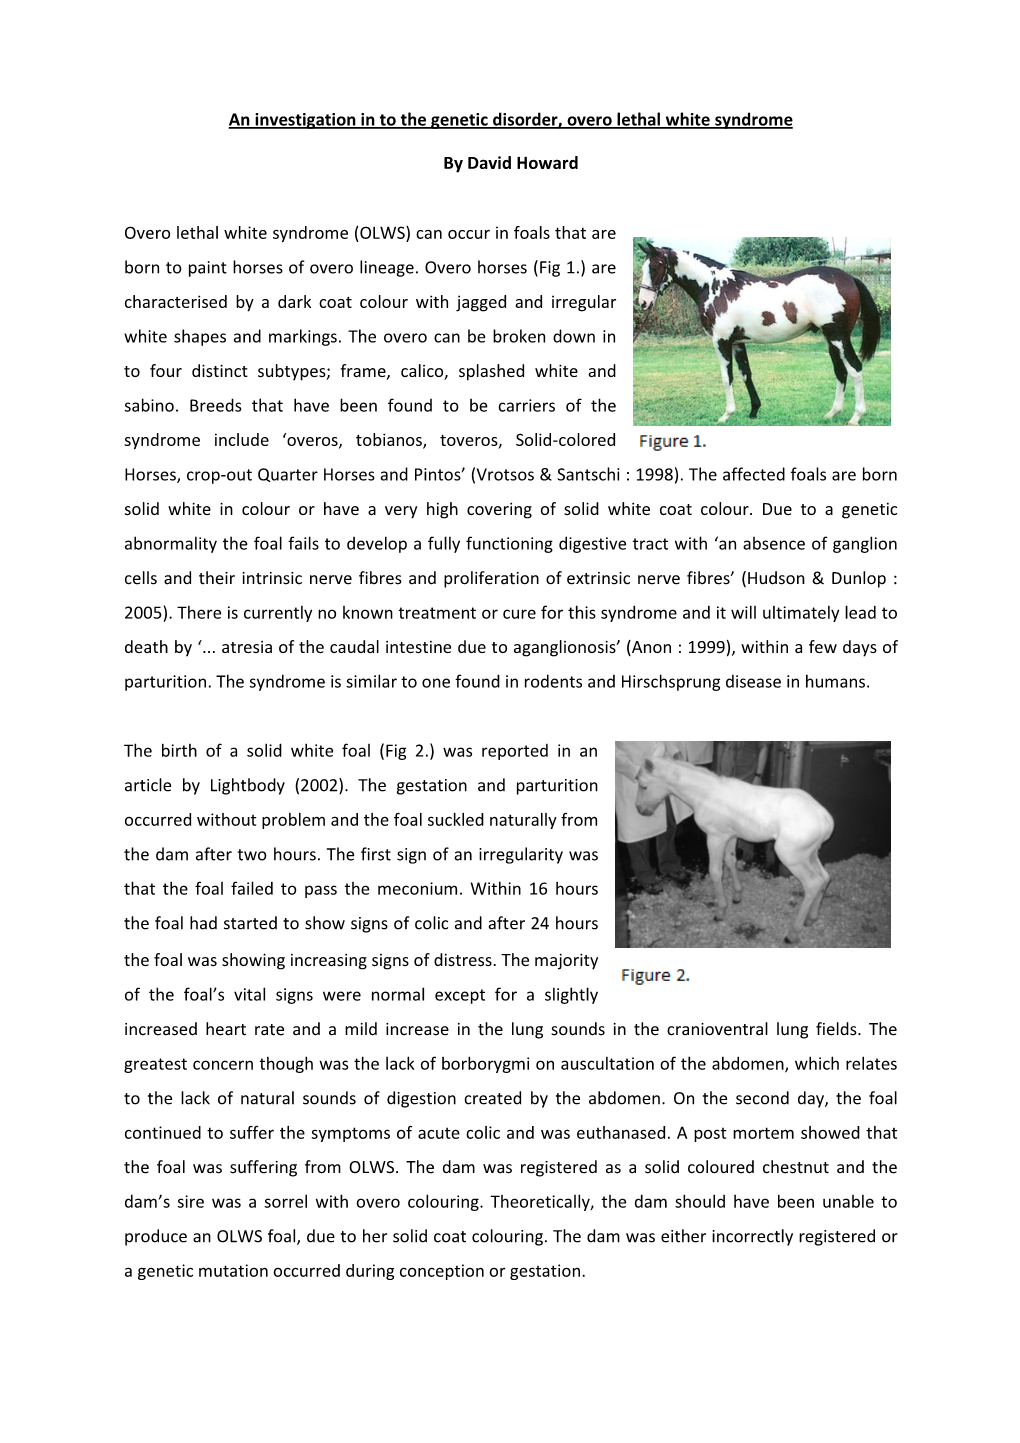 OLWS) Can Occur in Foals That Are Born to Paint Horses of Overo Lineage